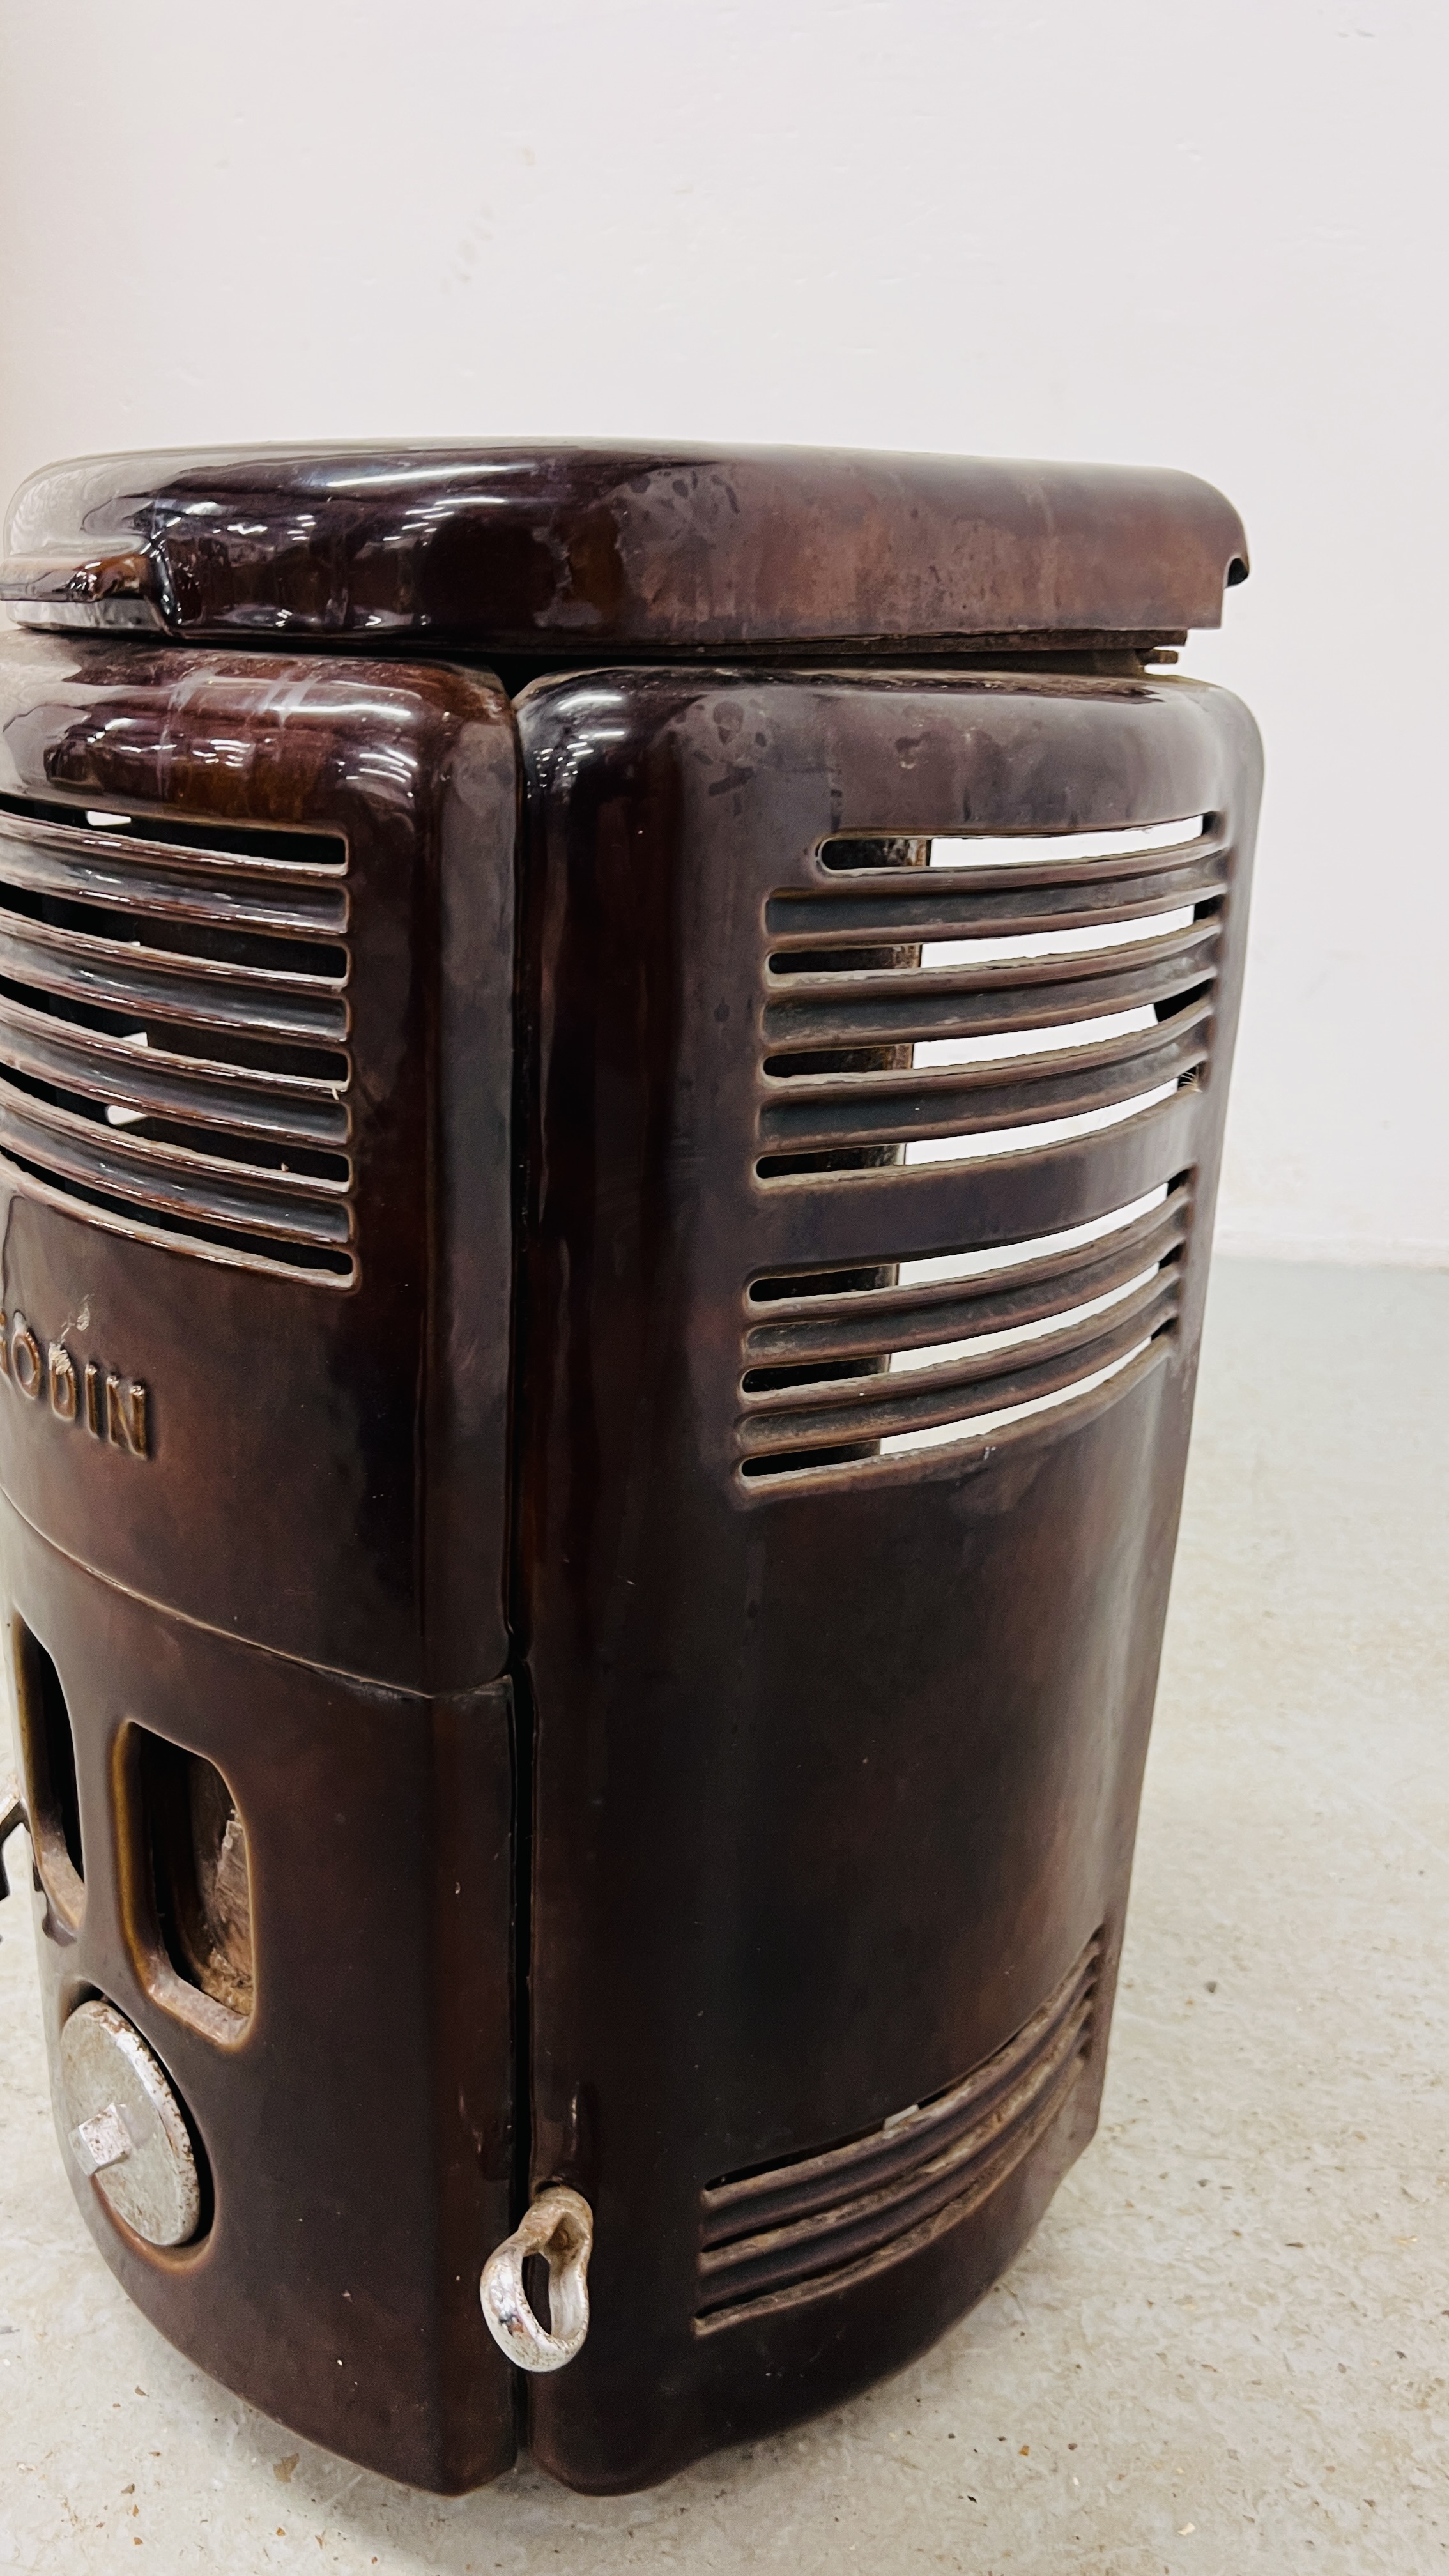 A SMALL GODIN VITREOUS ENAMELLED SOLID FUEL STOVE - HEIGHT 57CM. - Image 9 of 10